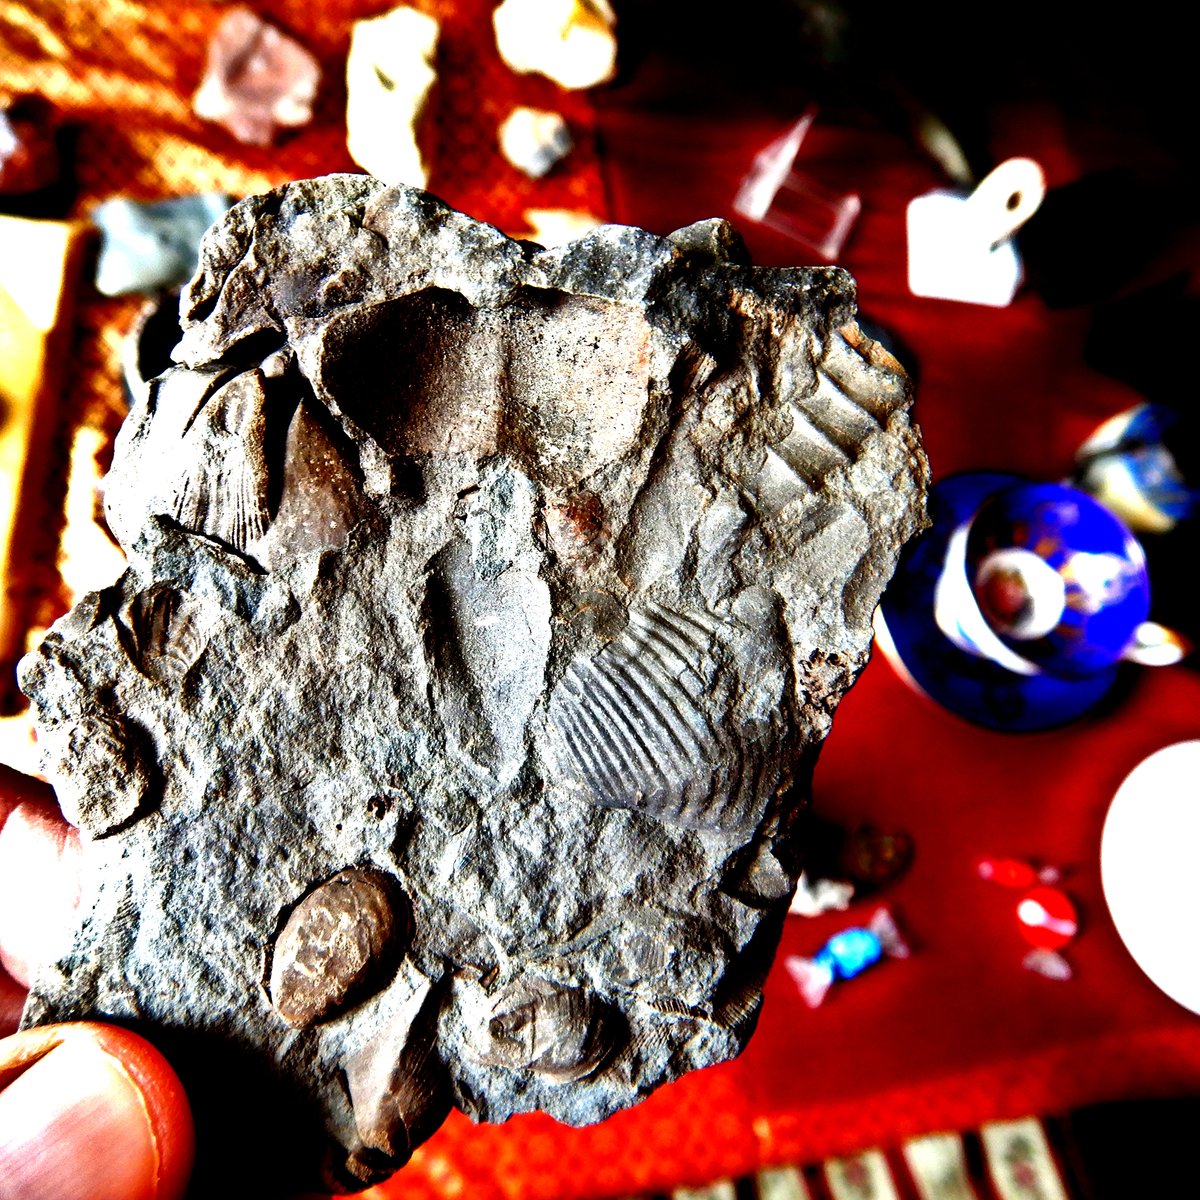 Happy #Fossilfriday with this rock full of Devonian fossils! 
---
#fossil #art #palaeontology #fossilhunting #fossilhunter #geologyrocks #howdoyoumuseum #scicomm #naturalhistory #instamuseum #macrophotography #arte #natura #fossilfriday #science